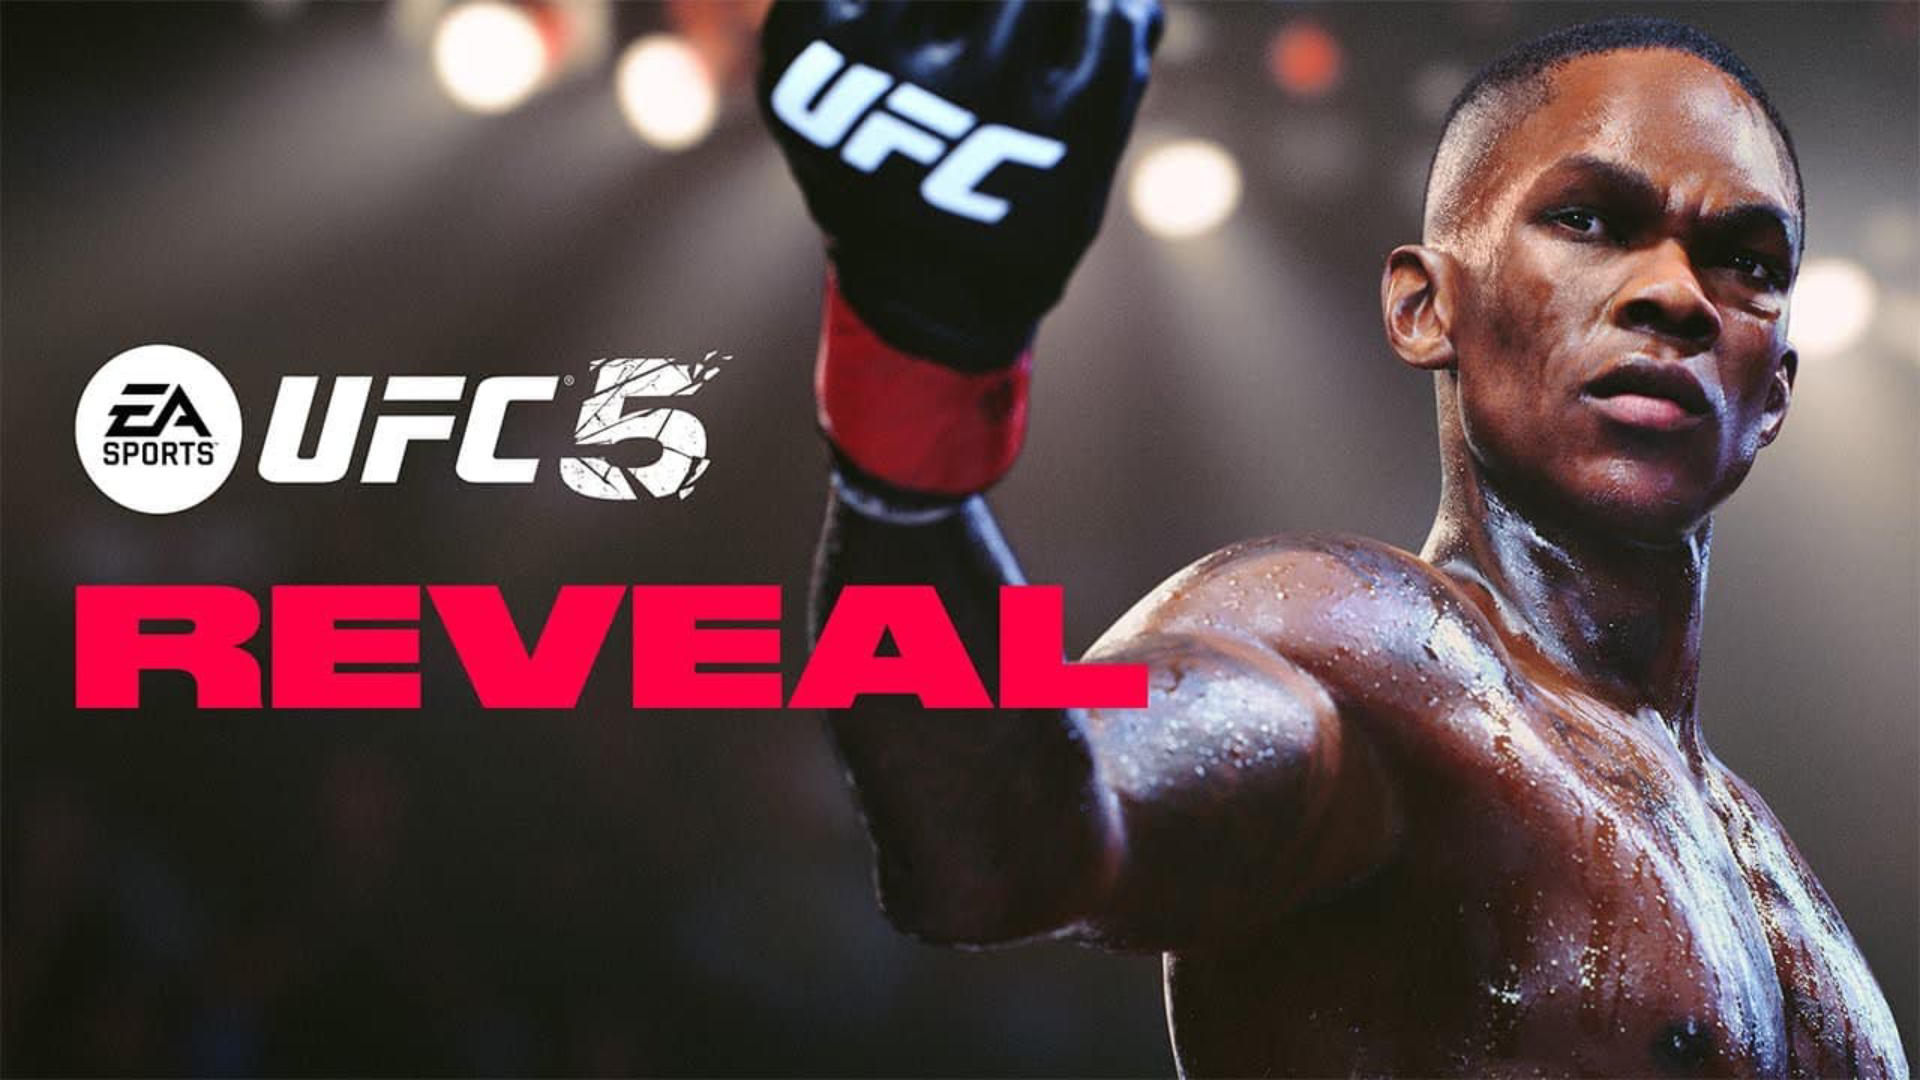 Banner of EA Sports UFC ៥ 